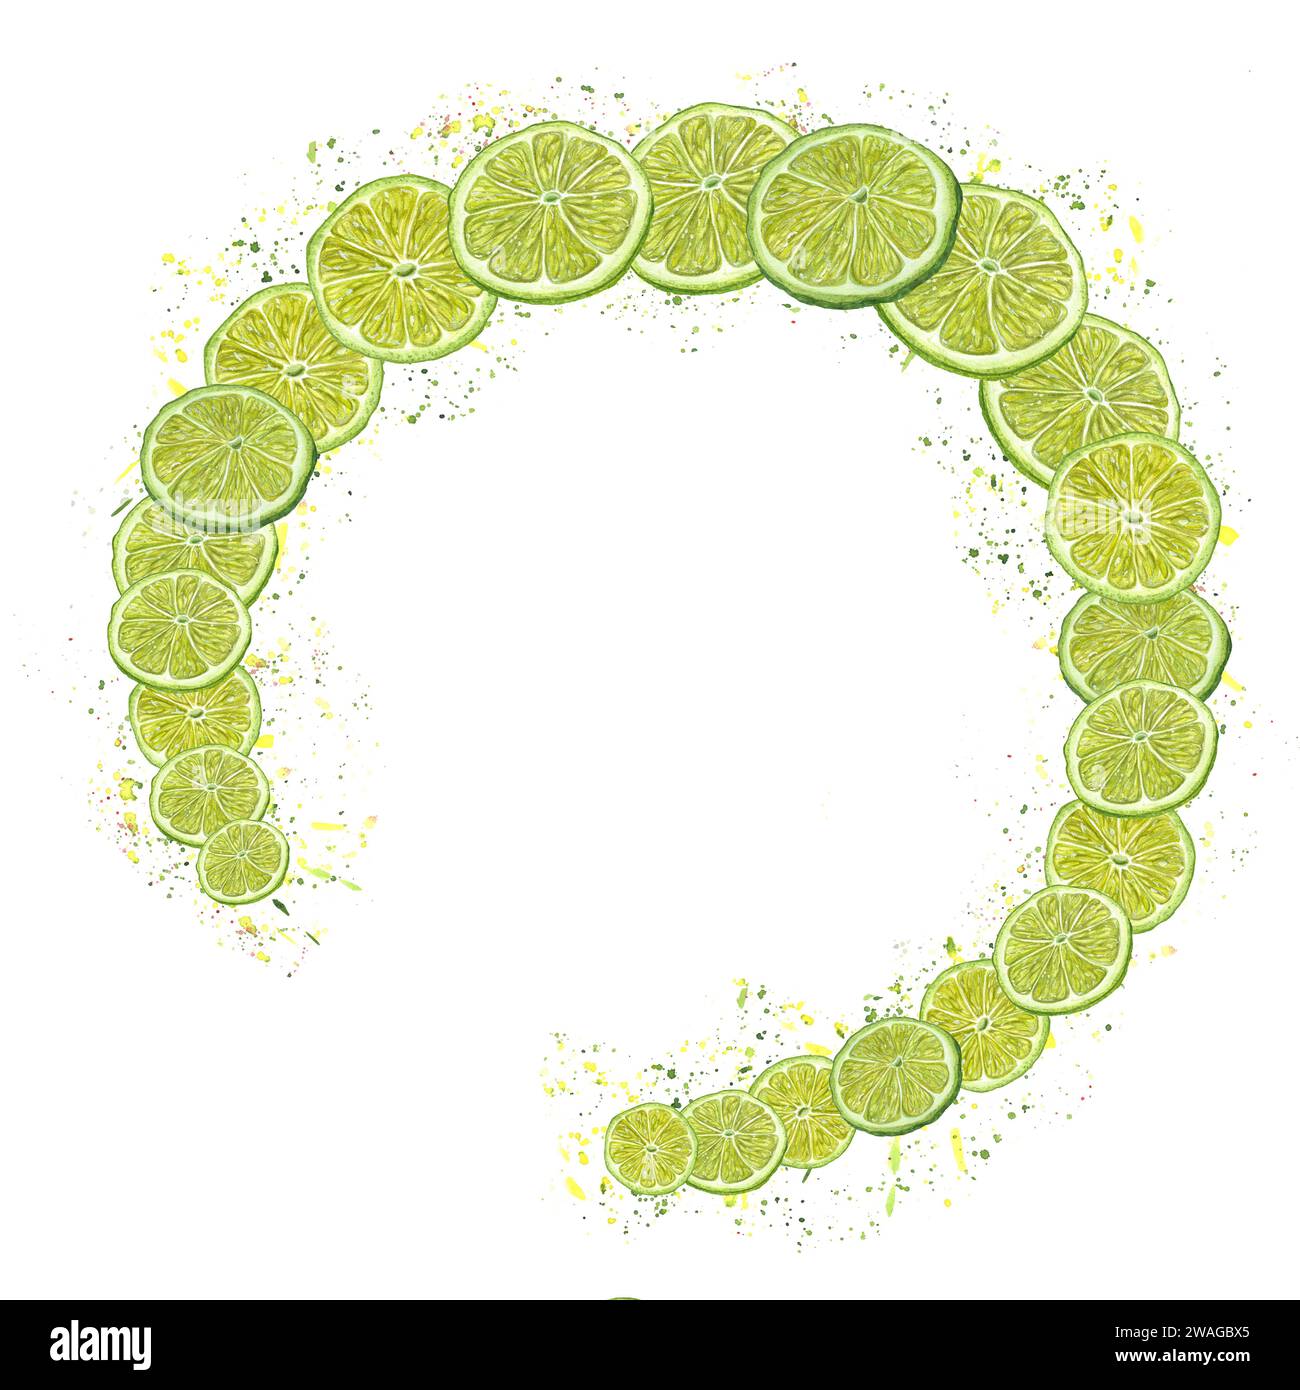 Semicircle of lime wedges. Citrus slices in juice splash. Fruit swirl, texture, colored dots. Yellow green confetti. Watercolor illustration Stock Photo